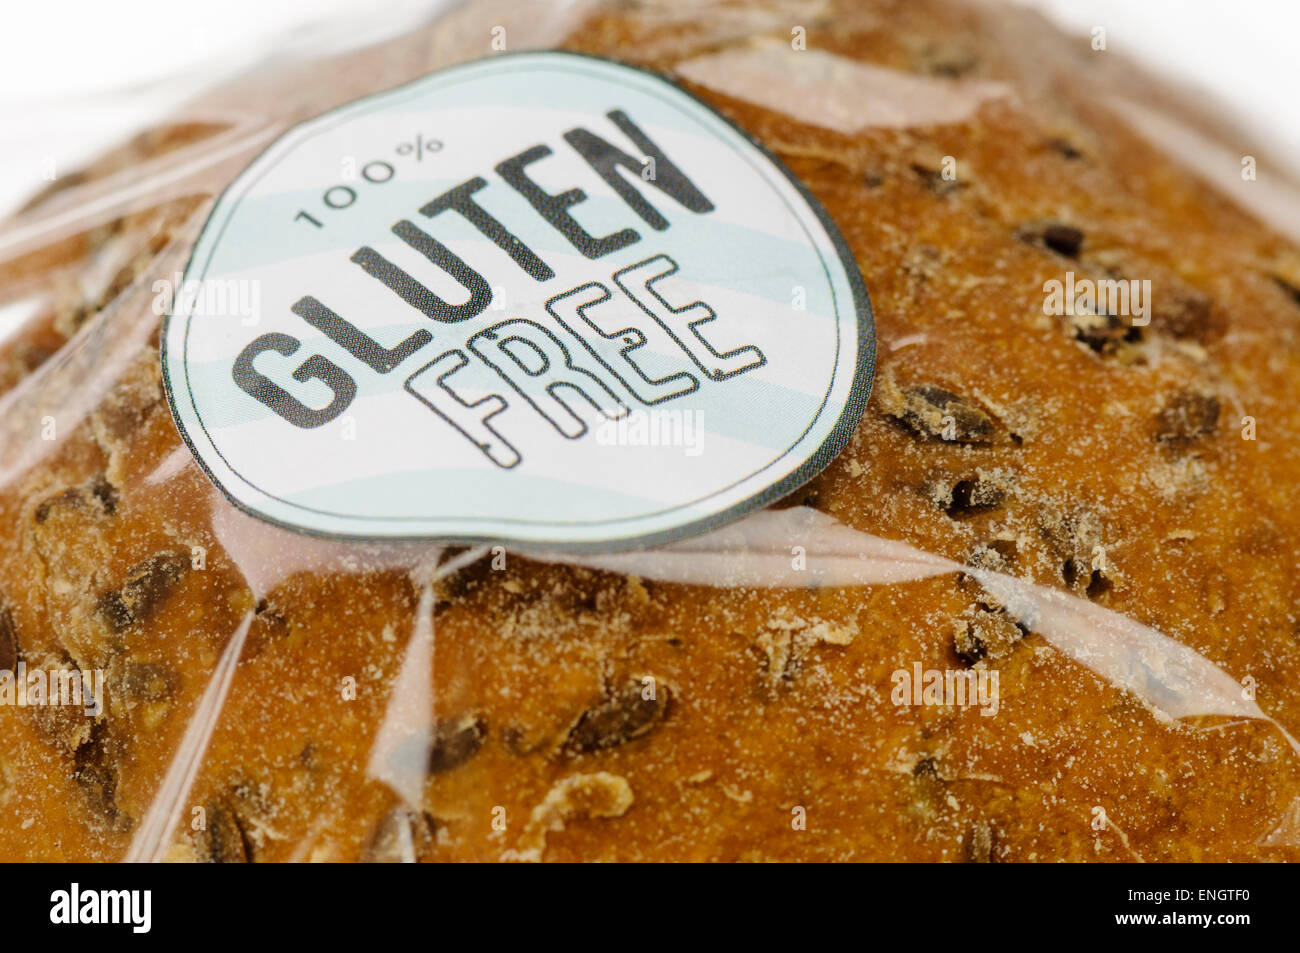 '100% Gluten Free' sticker on a loaf of brown seeded bread. Stock Photo